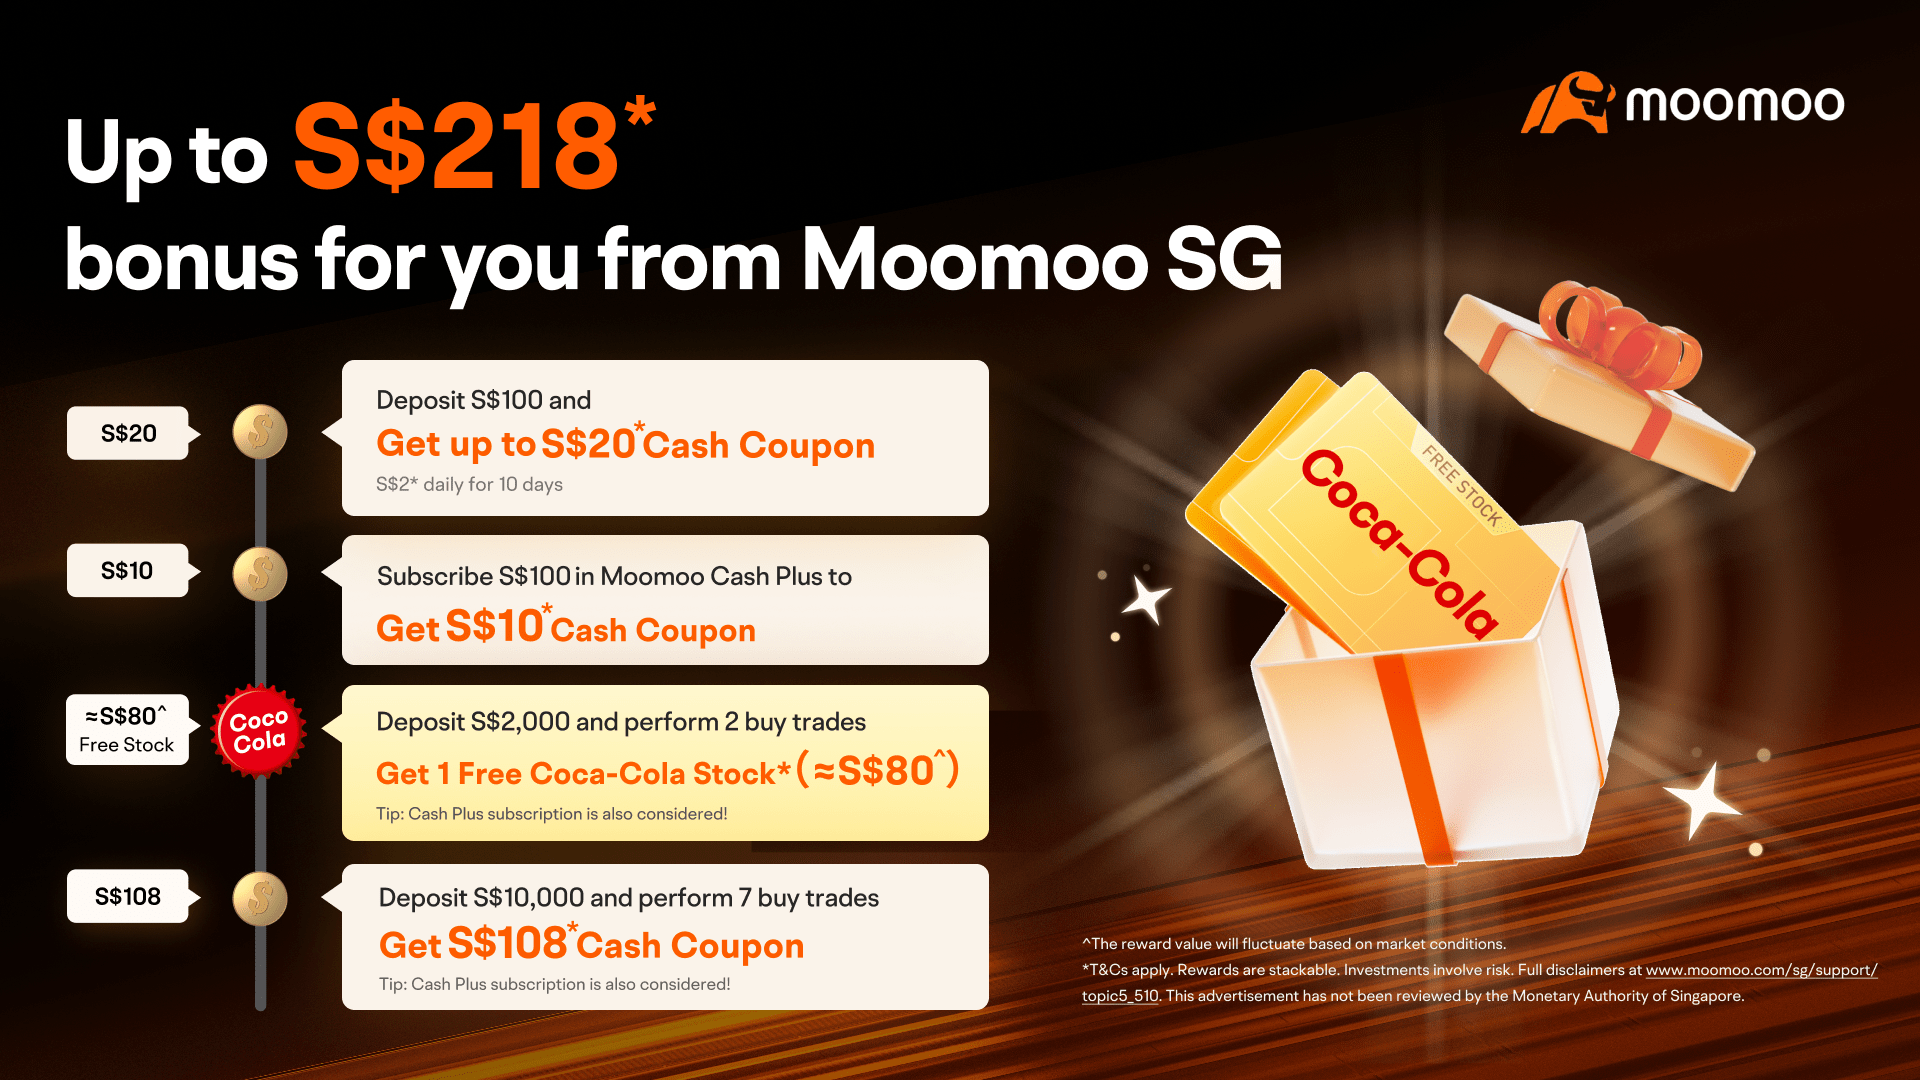 Enquiries for moomoo March 2022 merchandise rewards in up co